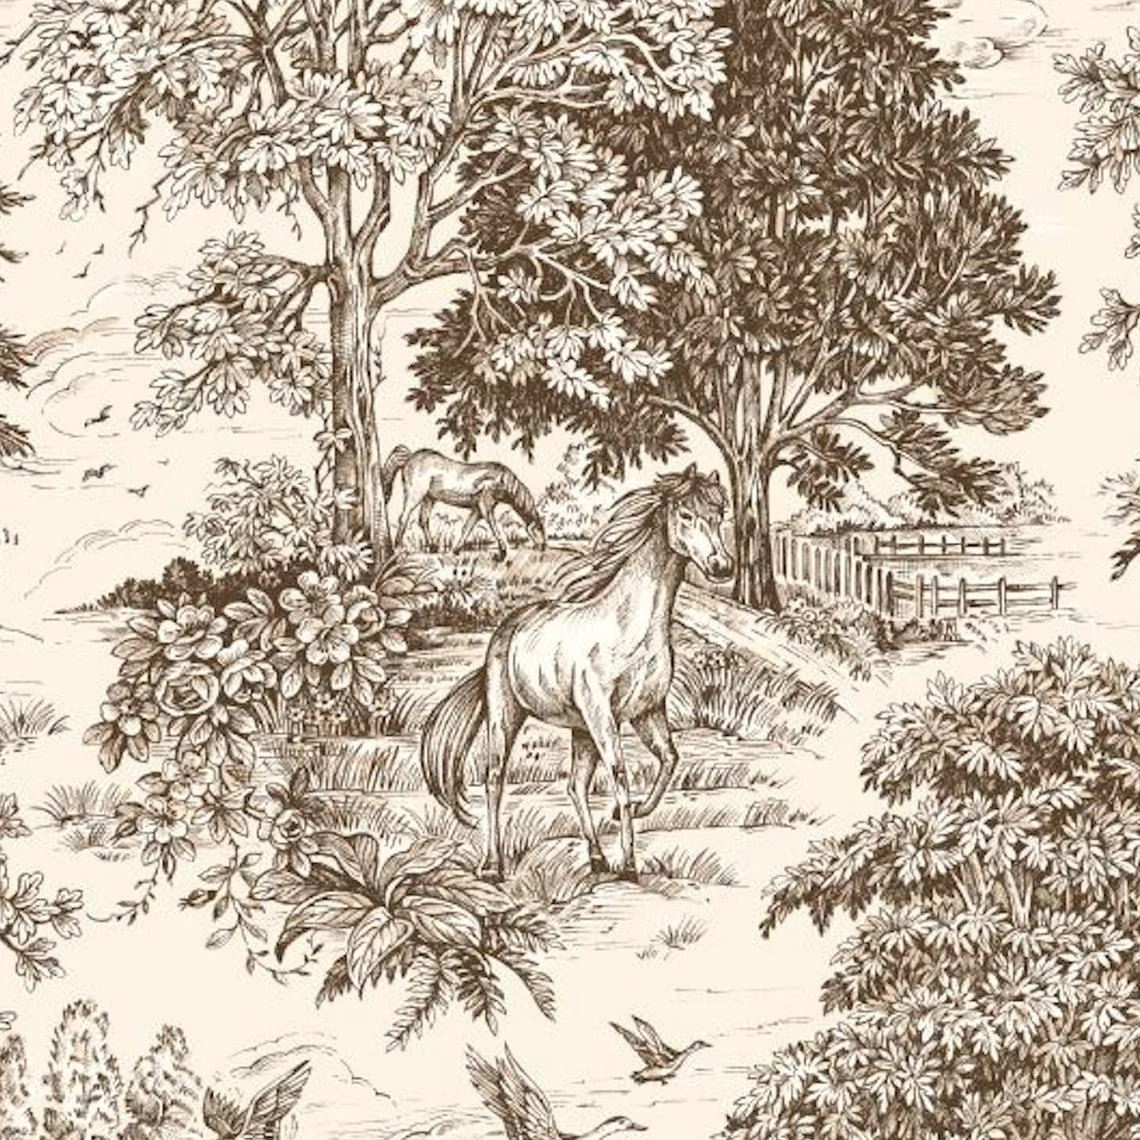 tailored crib skirt in Yellowstone Driftwood Brown Country Toile- Horses, Deer, Dogs- Large Scale